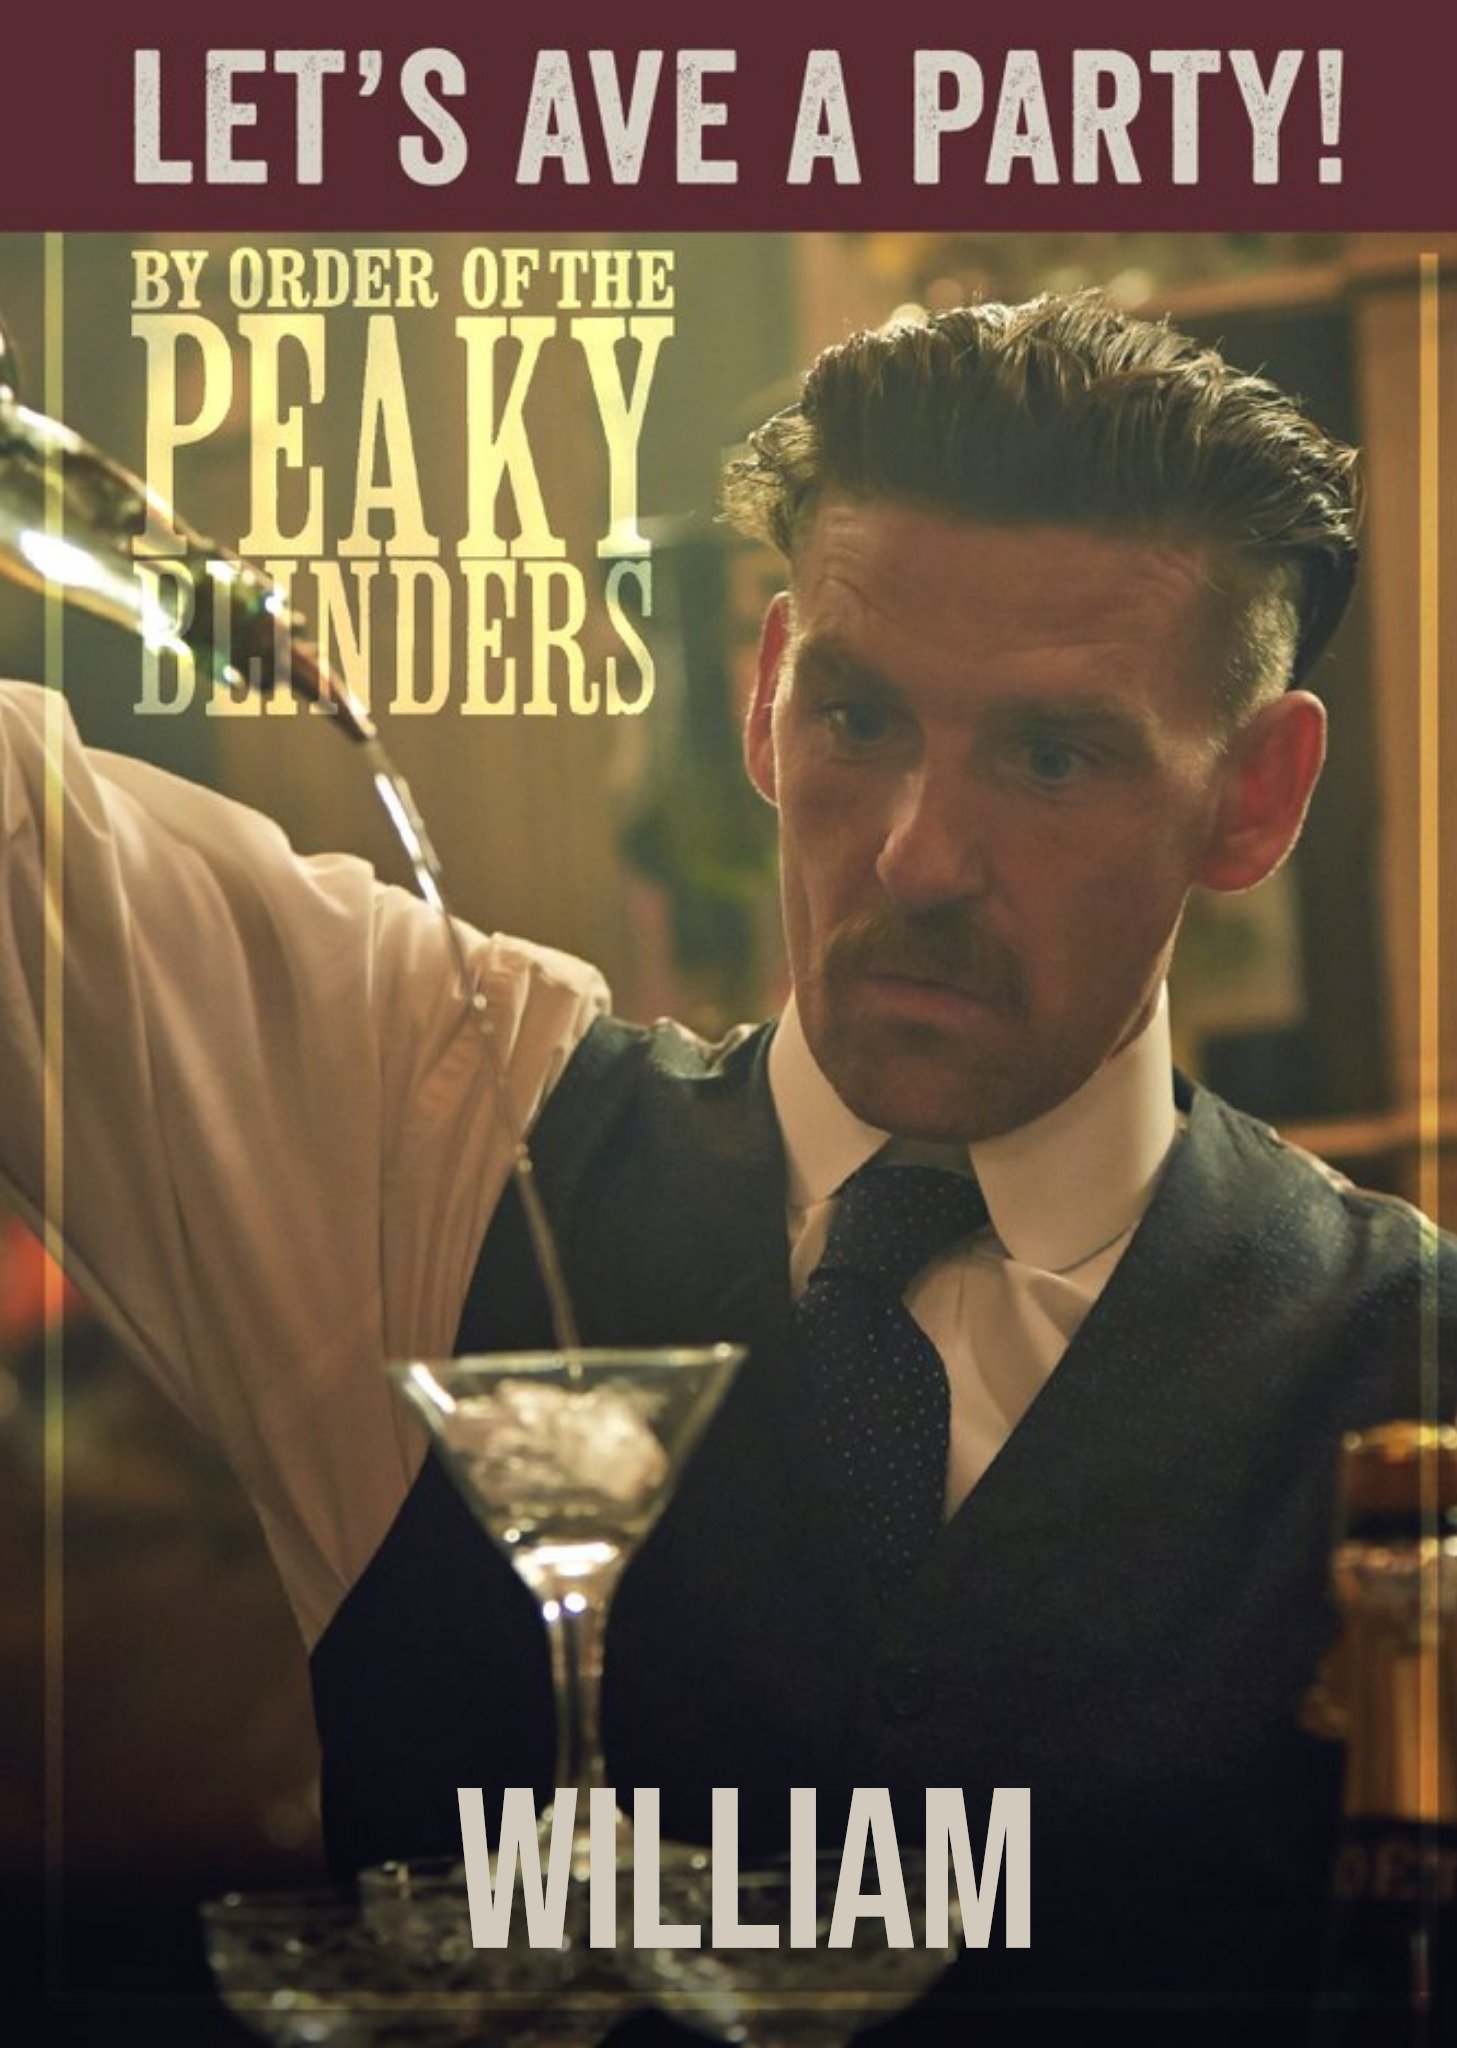 Peaky Blinders Let's Have A Party Personalised Birthday Card, Large